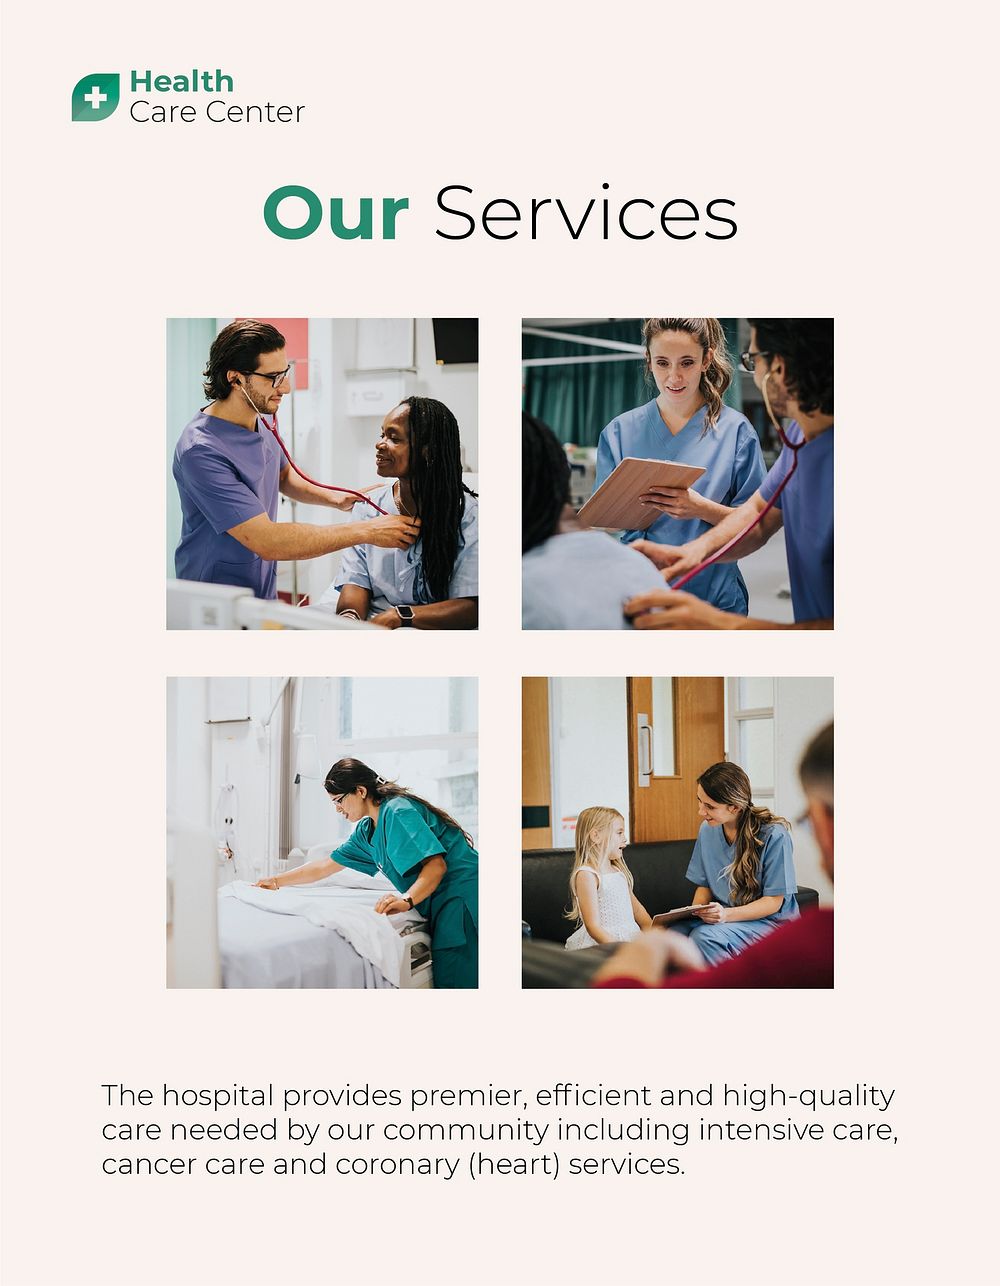 Medical services flyer template, healthcare & hospital vector